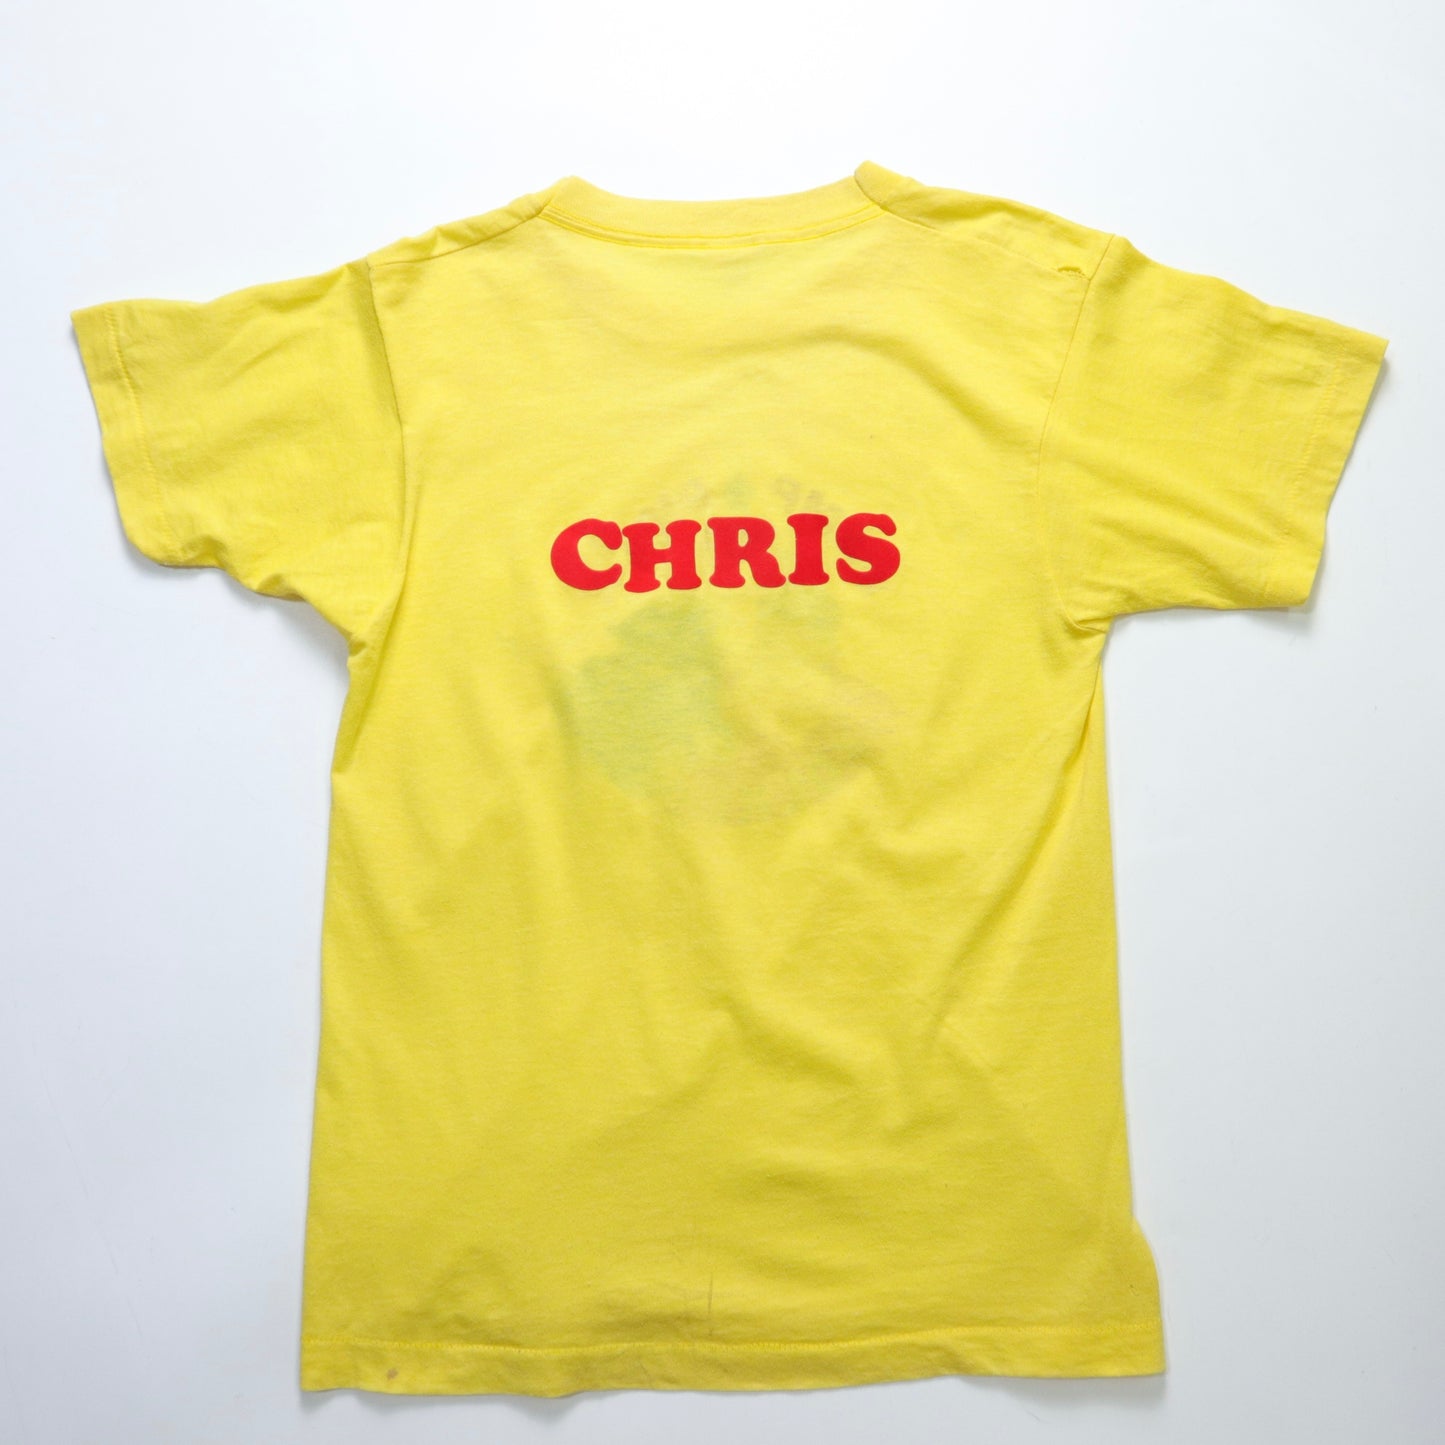 1991 American made Camp Birch yellow offset tee